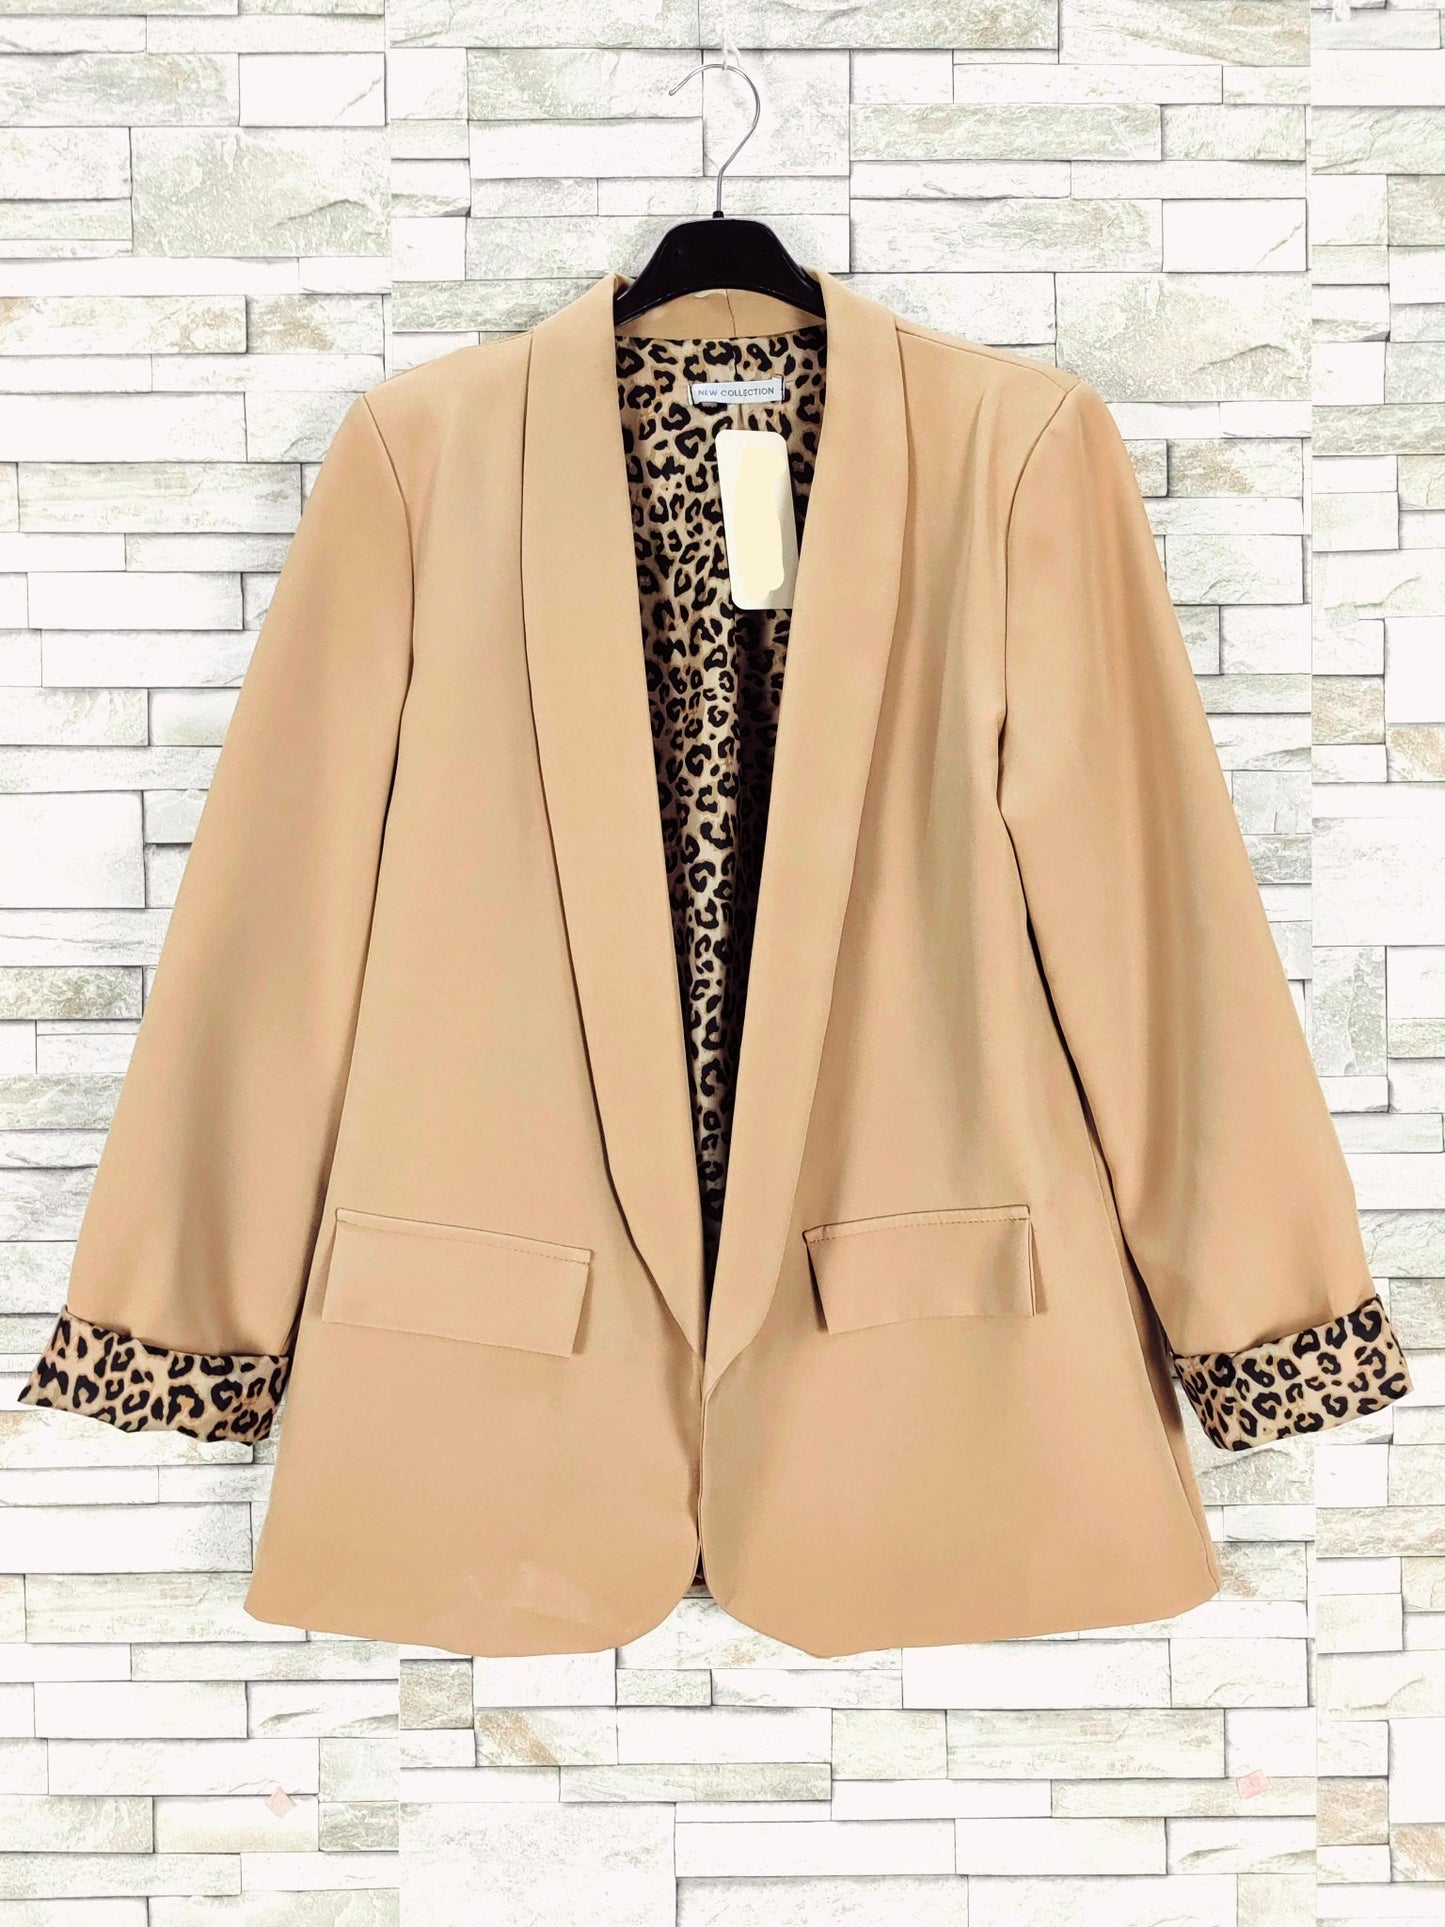 Get the best deals on Zara Animal Print Blazers for Women when you shop the largest online selection at eBay.com. Free shipping on many items | woman clothes mode schweiz